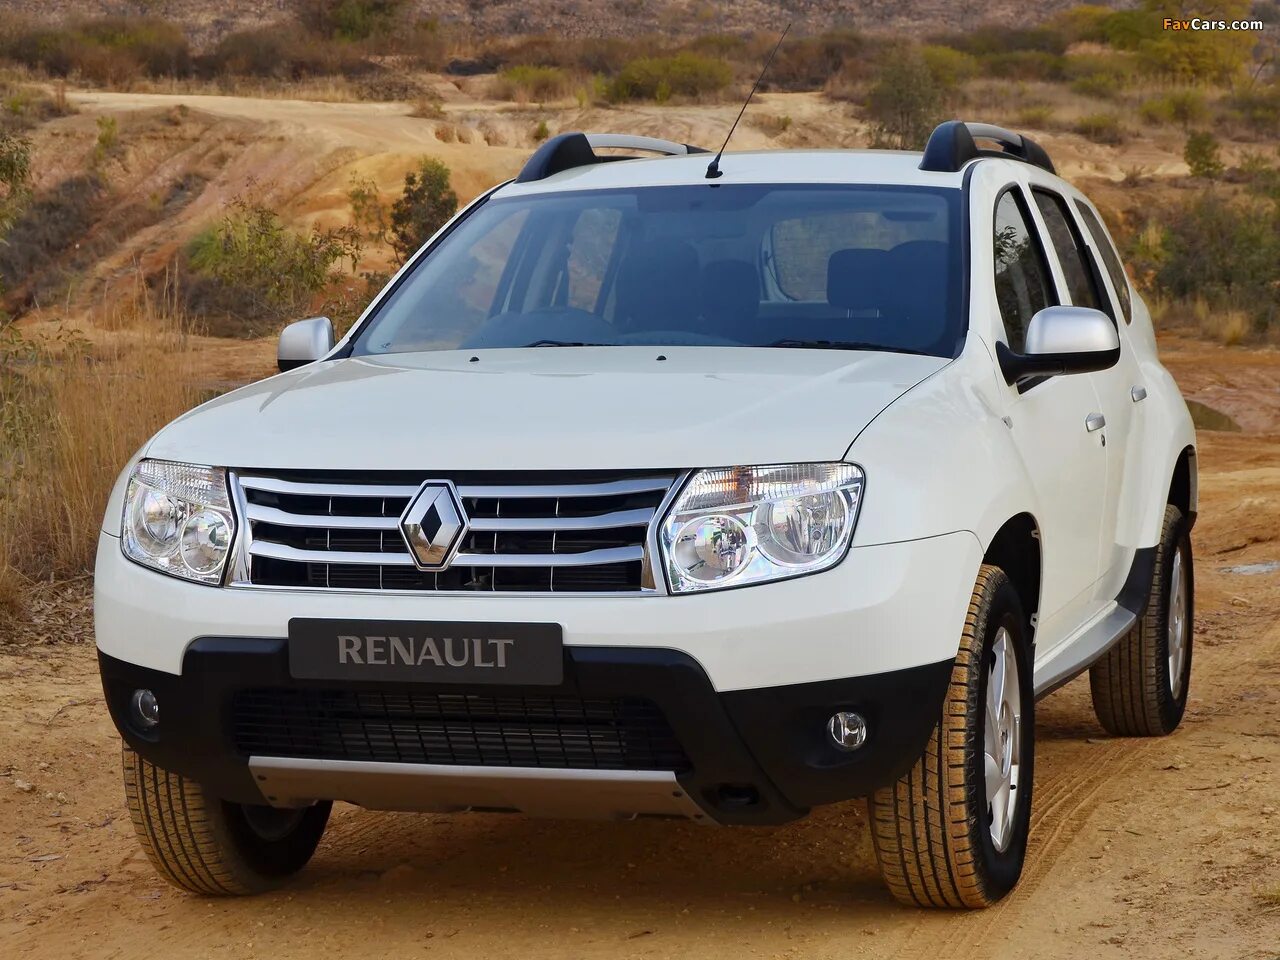 Renault Duster 2013. Рено Duster 2013. Рено Дастер 2013. Renault Duster 2013 года. Купить дастер 2013г